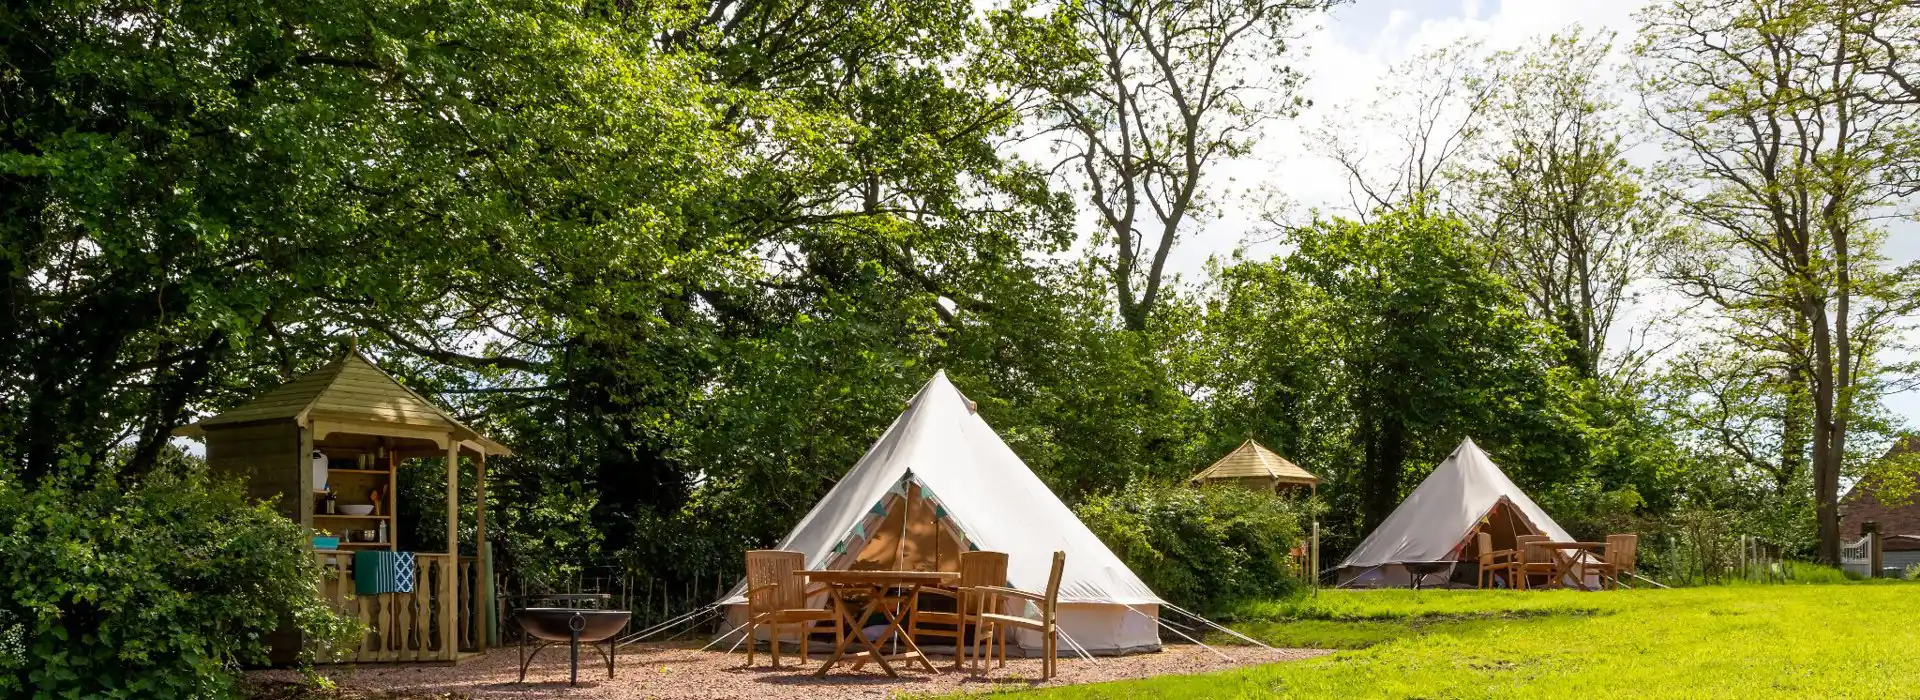 Glamping in the Forest of Dean